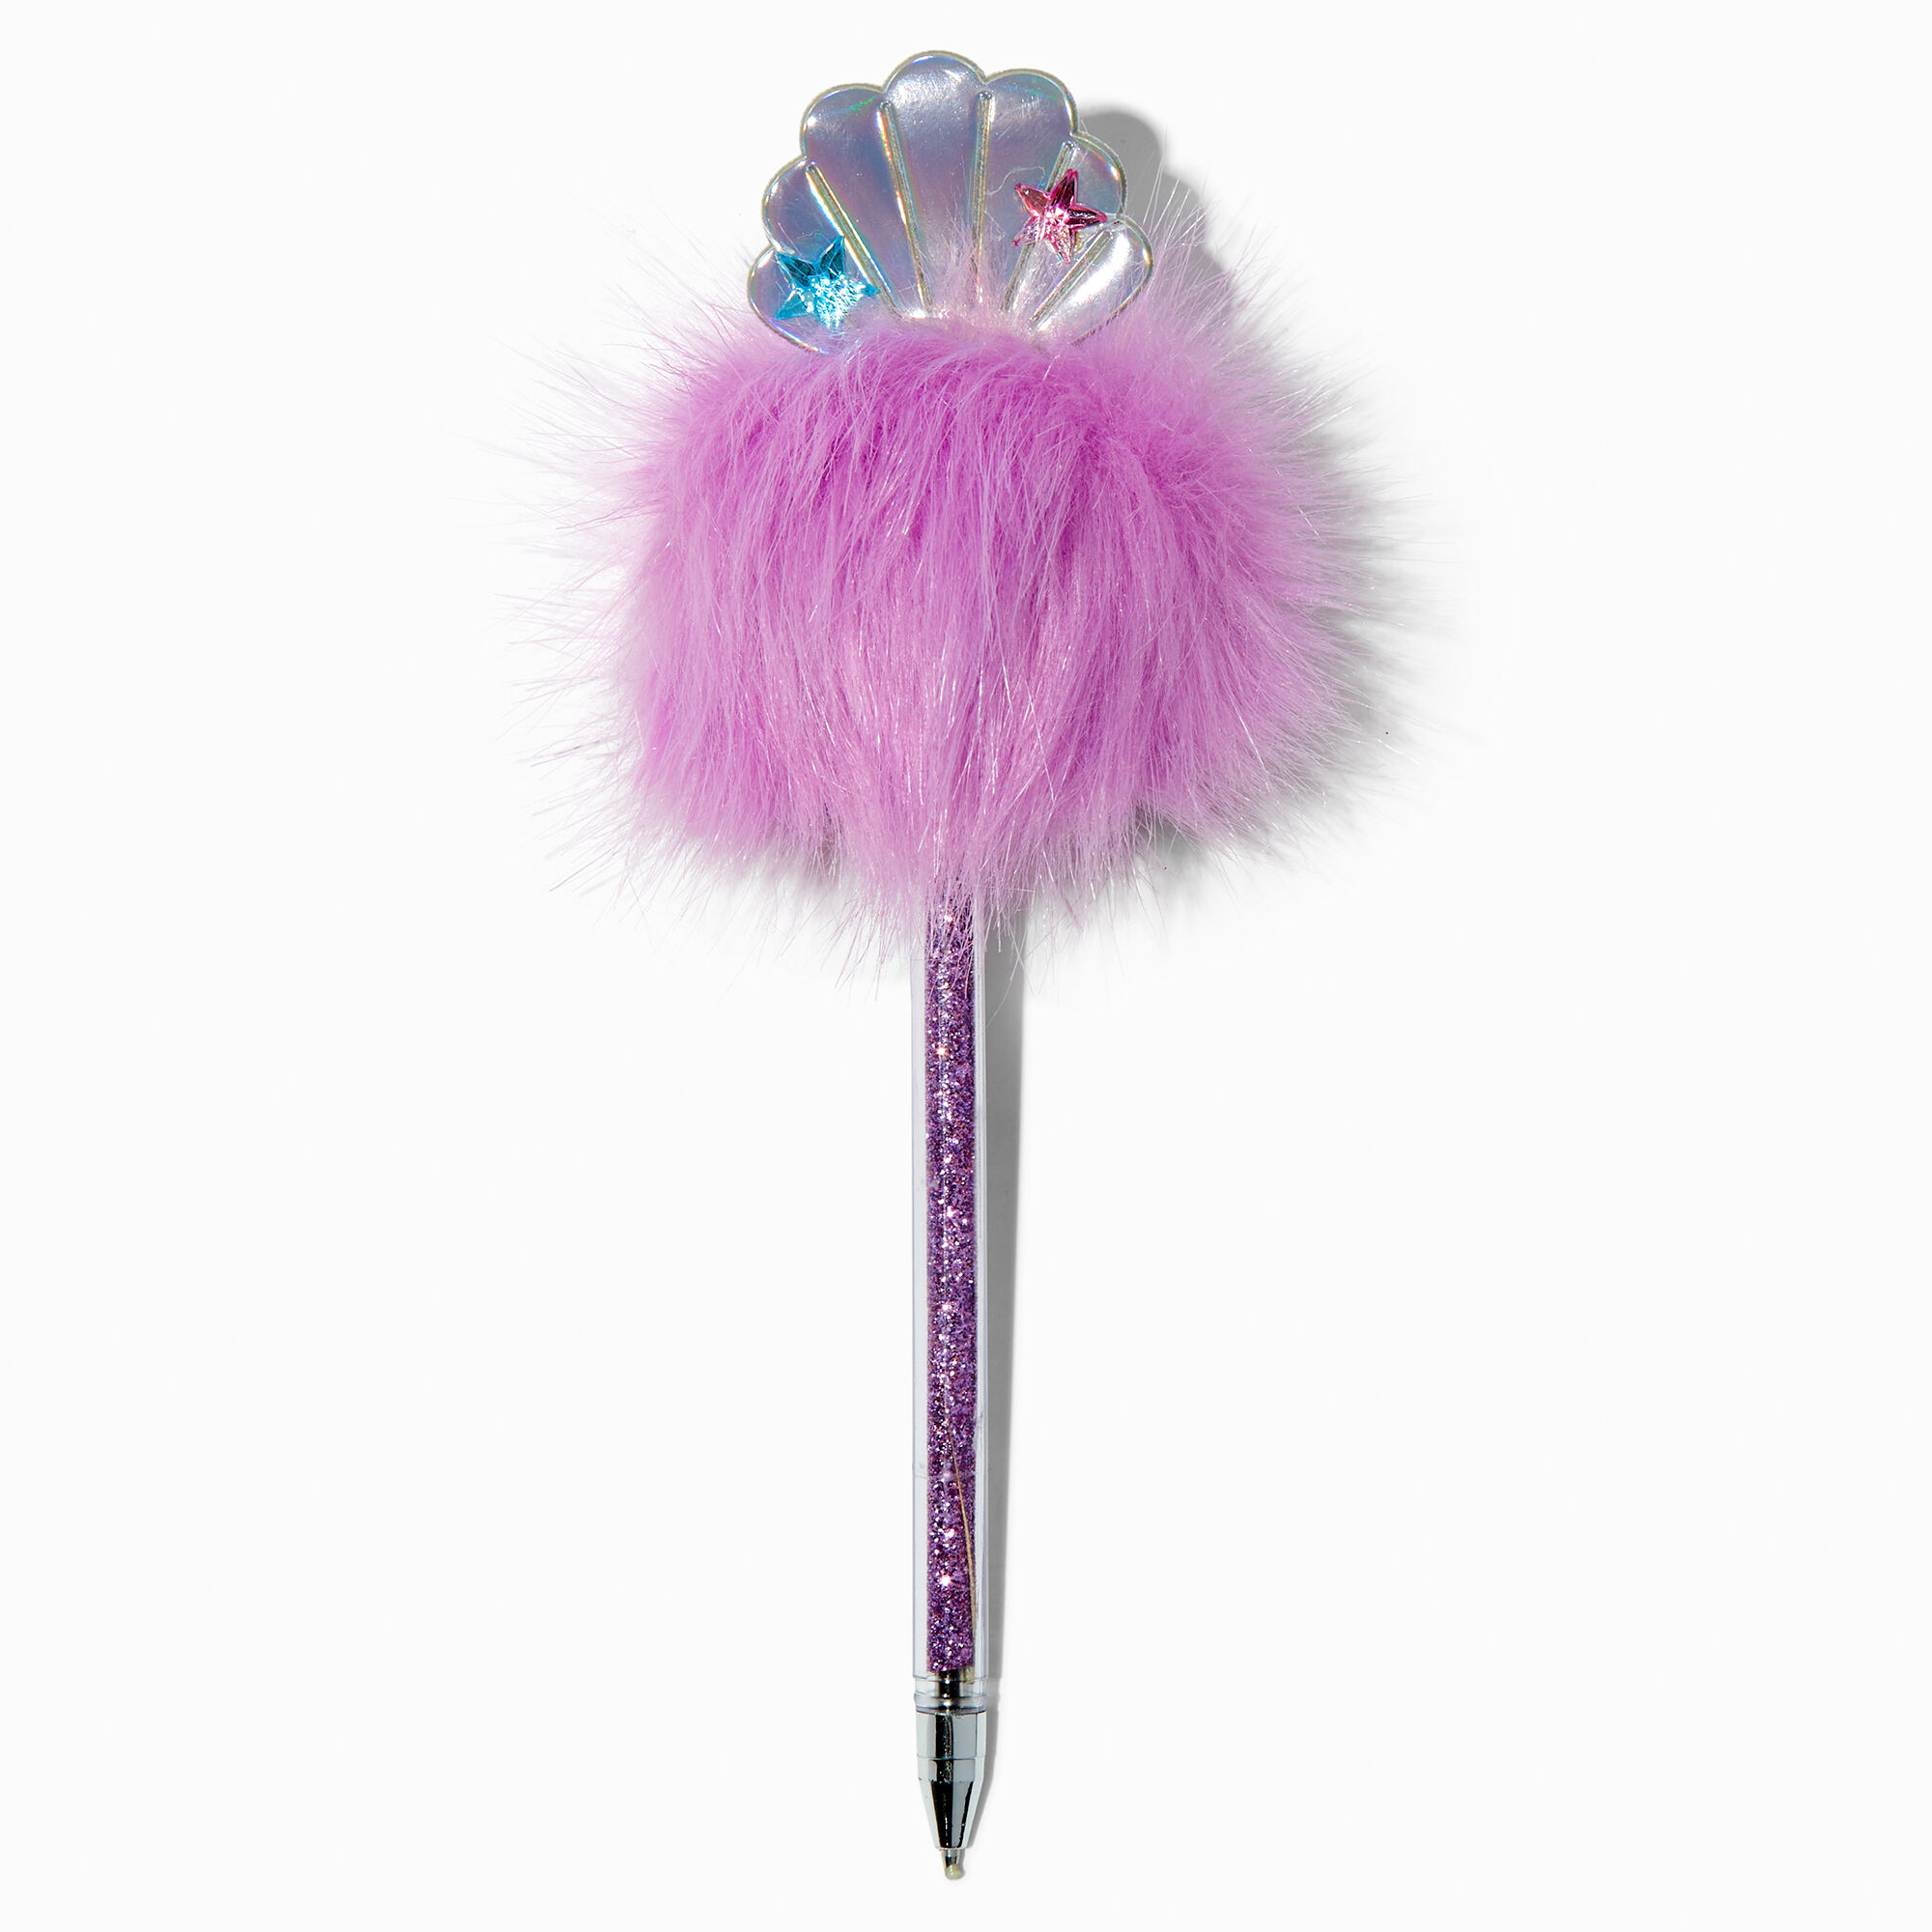 View Claires Iridescent Shell Pom Pen Pink information